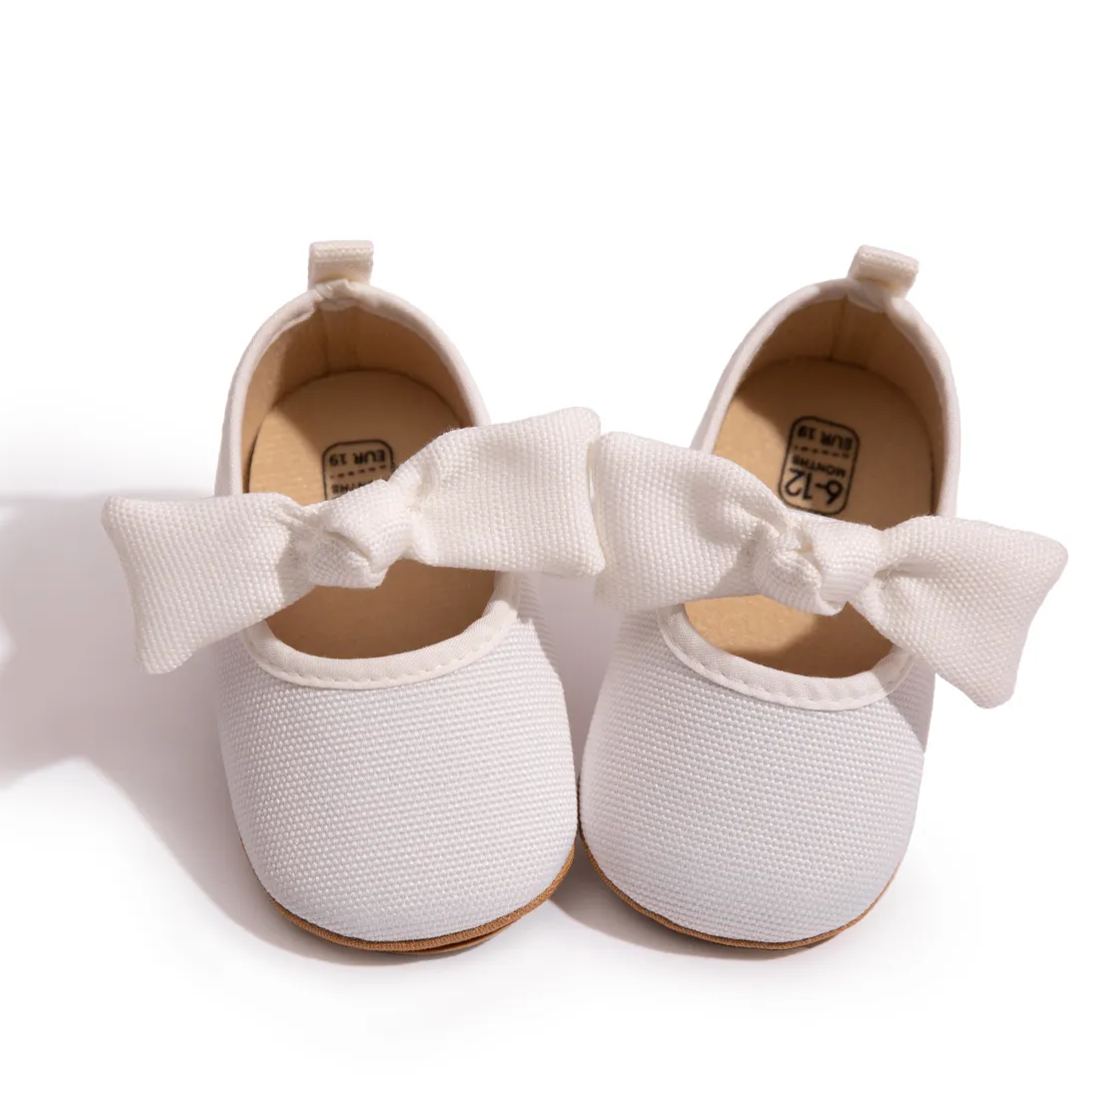 Waterproof PU Leather Bow-Knot Baby Dress Shoes